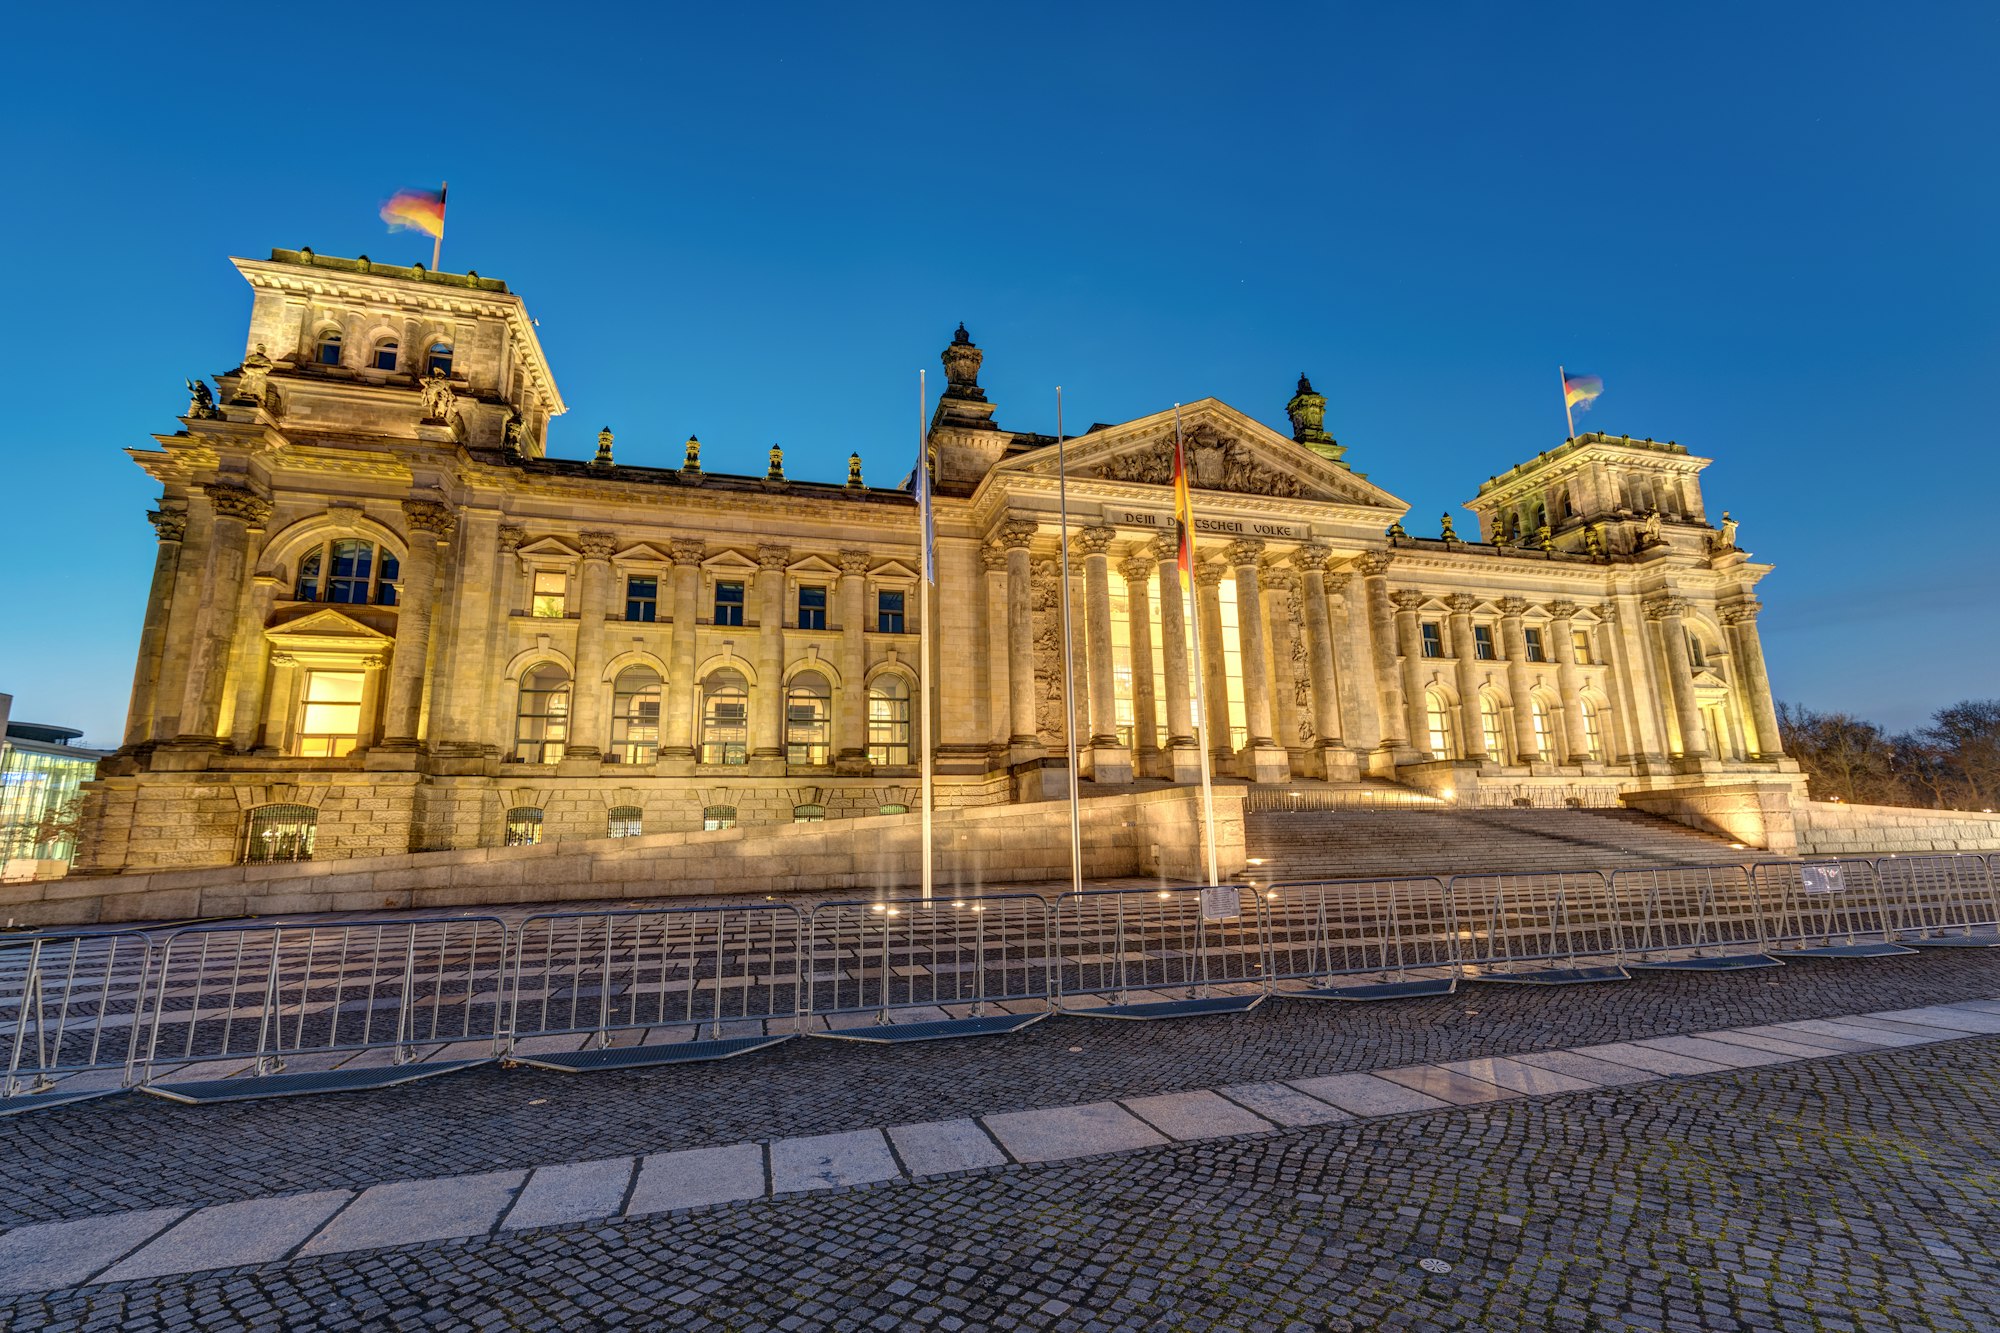 The german Reichstag in Berlin at dawn